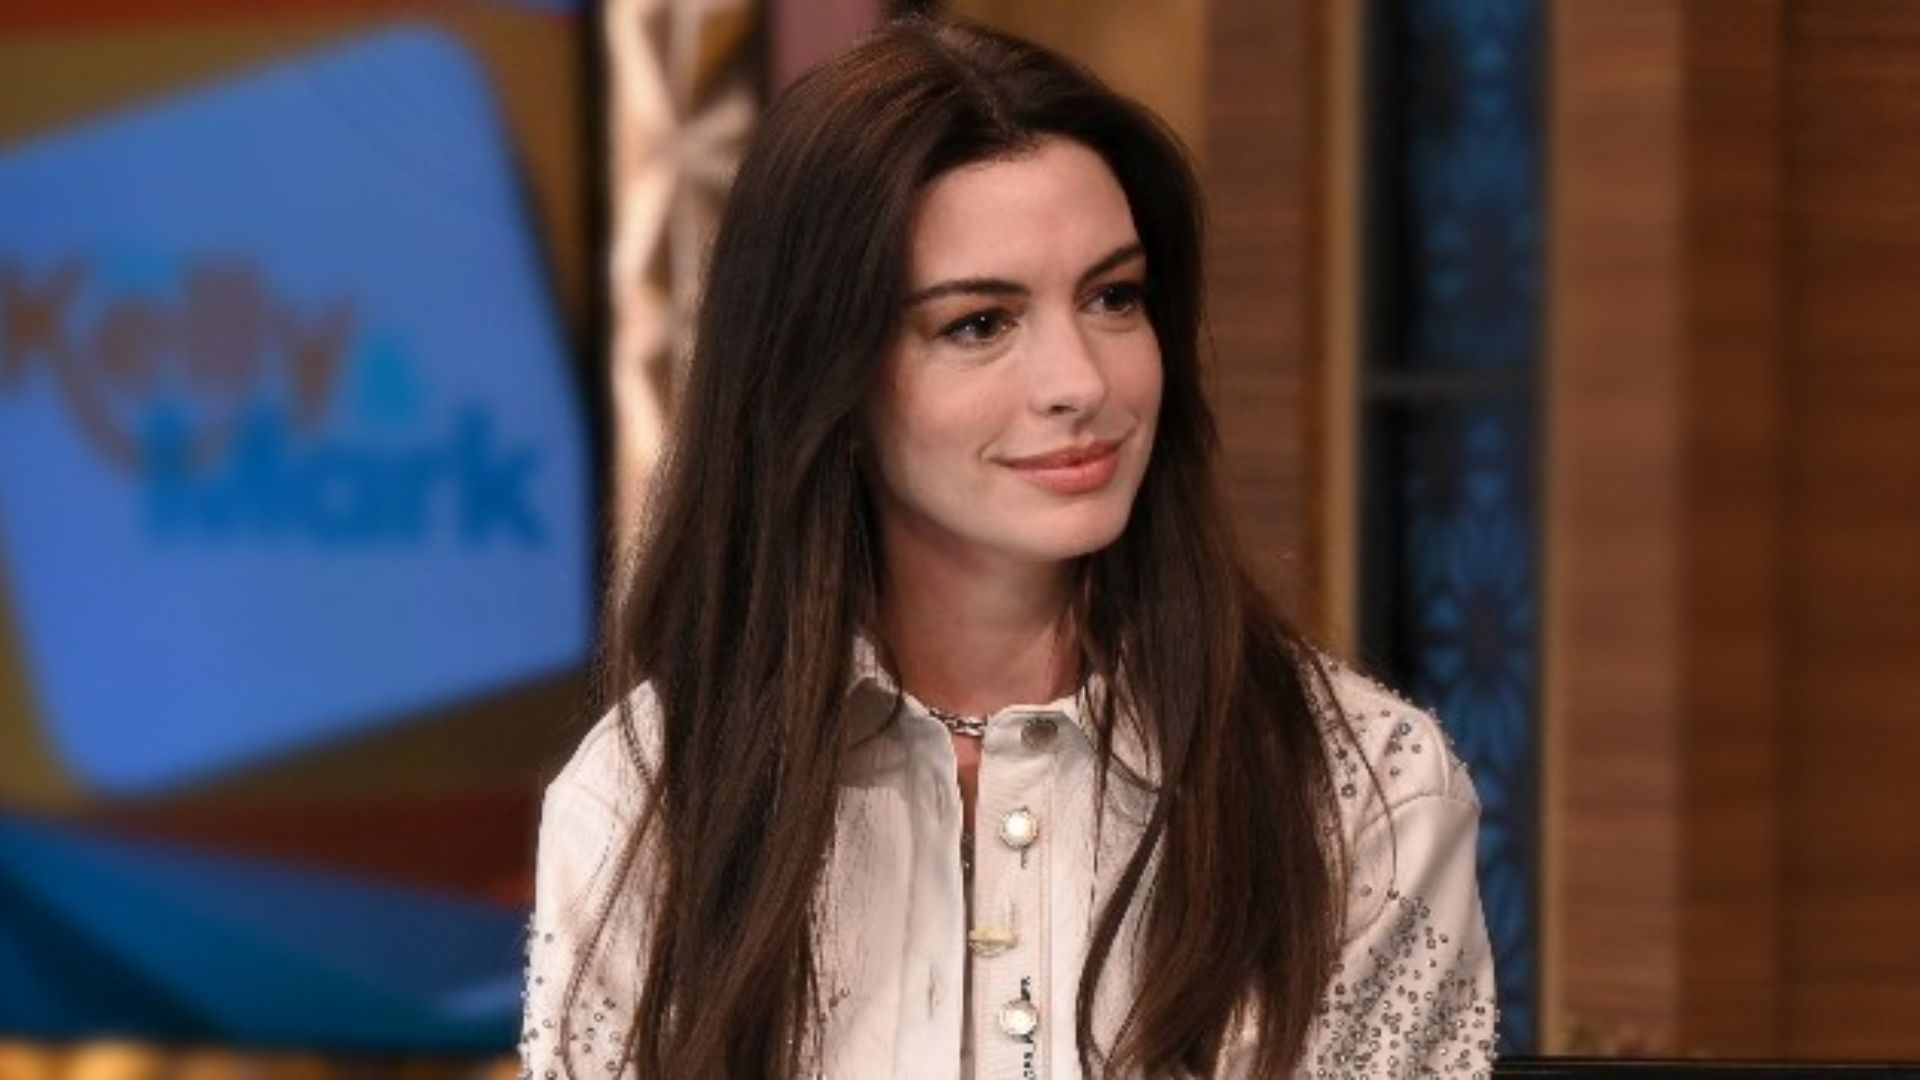 “I had an angel in Christopher Nolan”: Anne Hathaway post her Oscar win